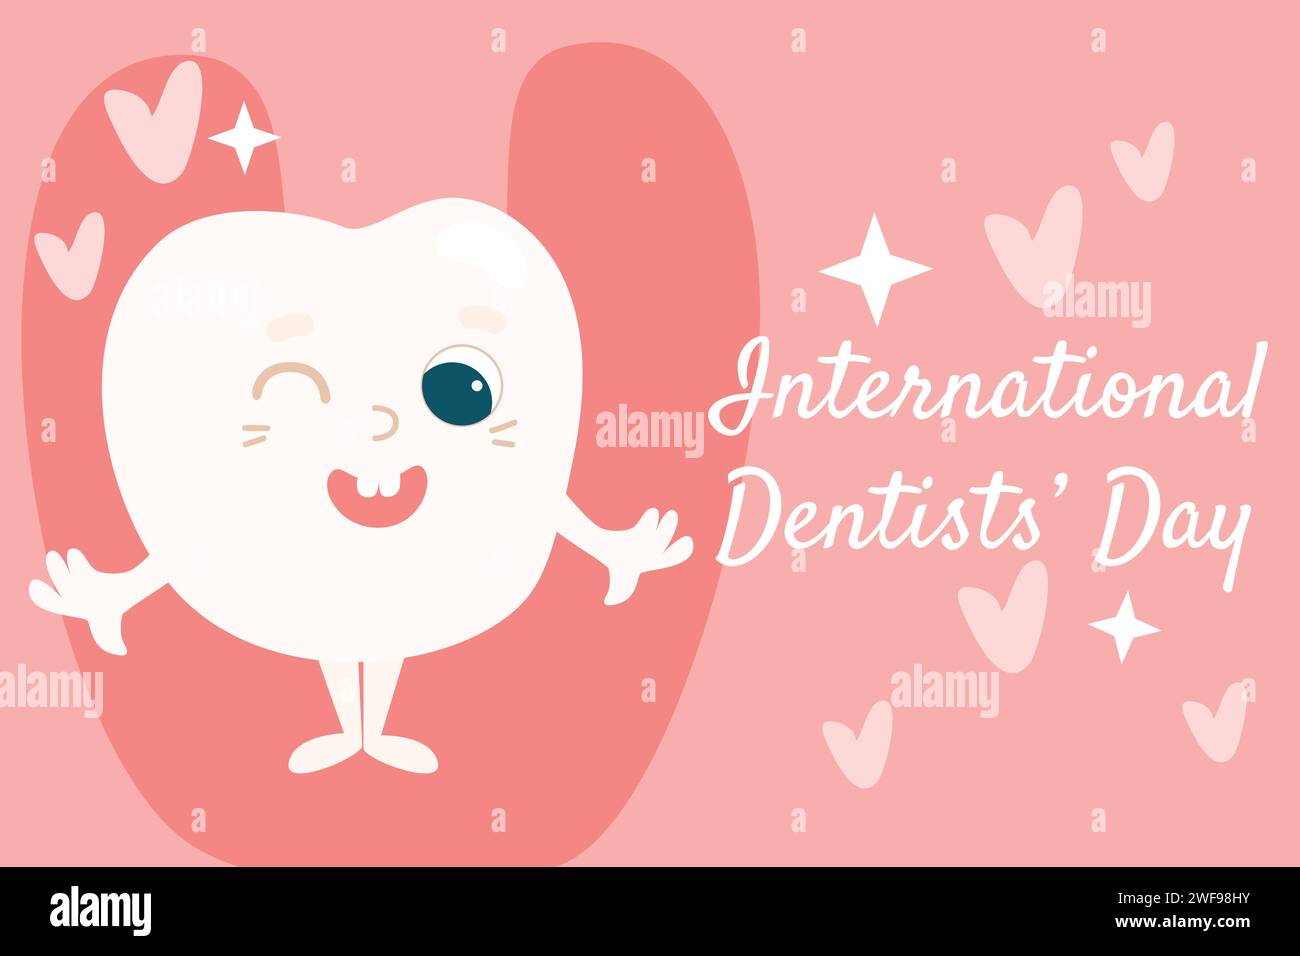 Dentist's Day greeting card. A cute little tooth with glasses and a happy smiling face. Stock Vector